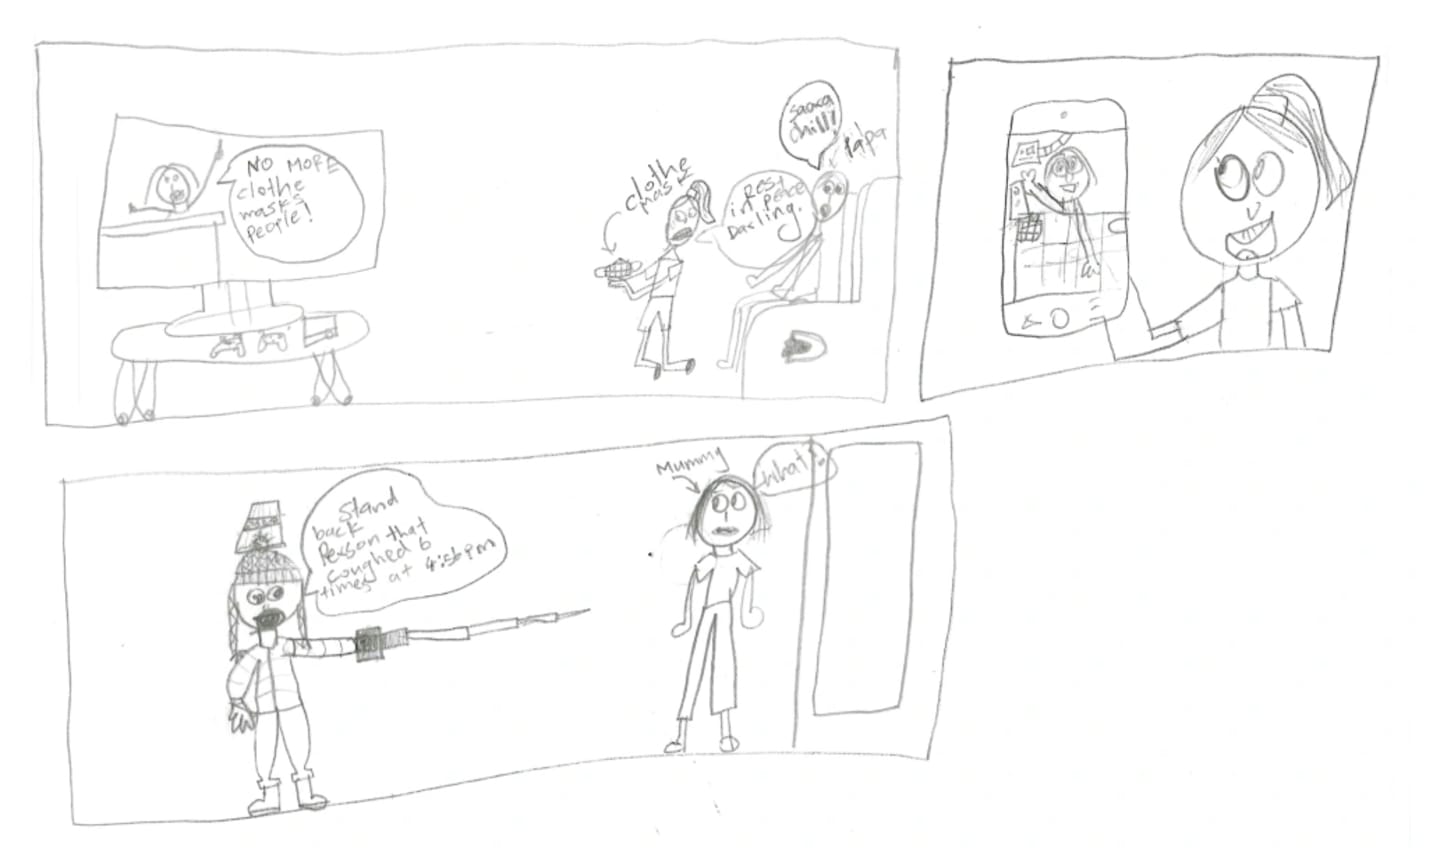 The Pandemic Generation study asked children to draw their experiences of Covid-19 lockdown.